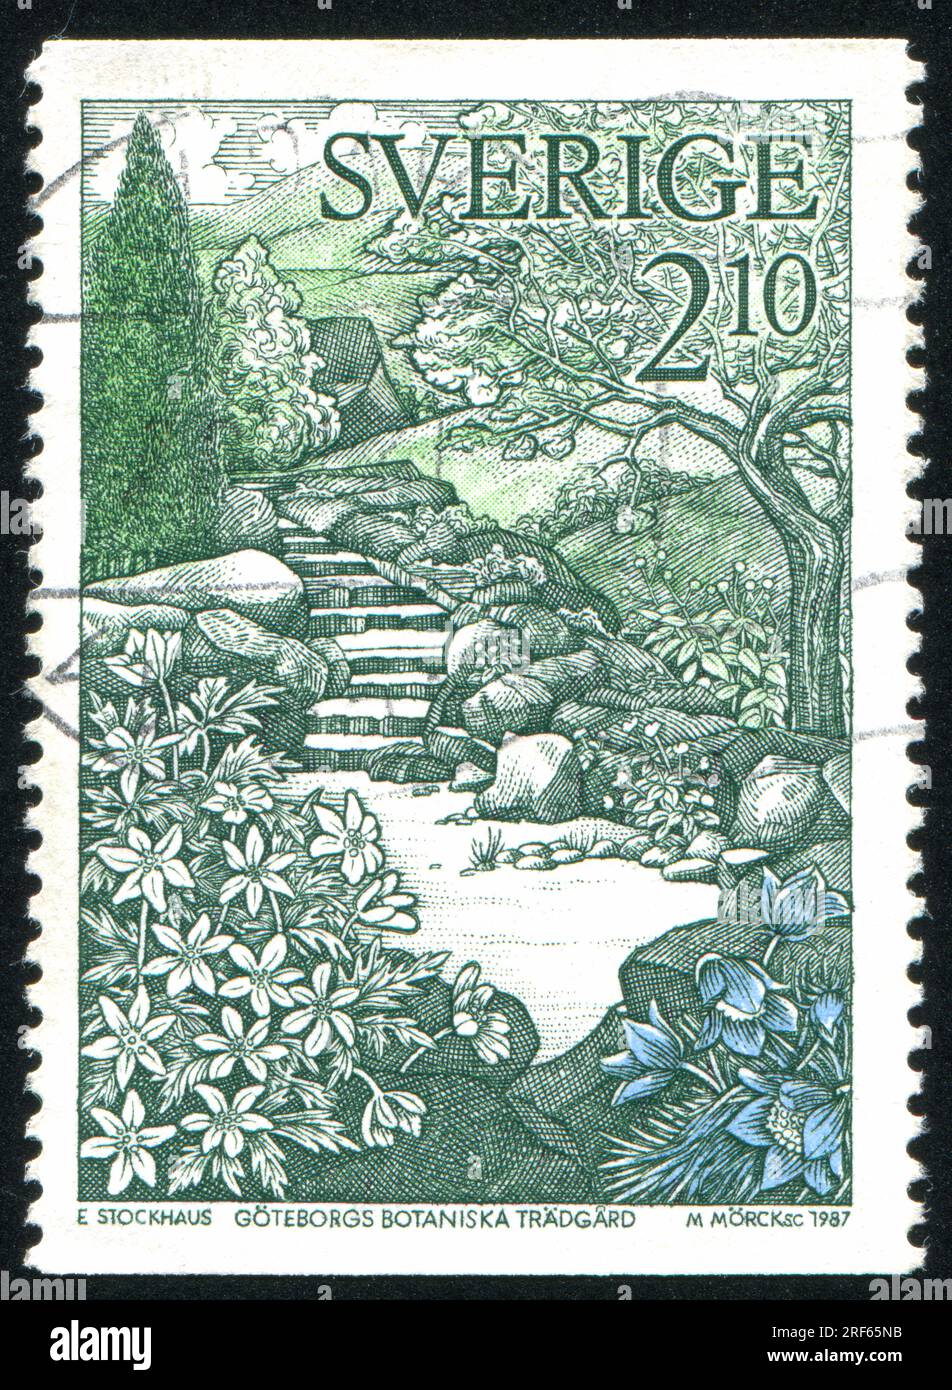 RUSSIA KALININGRAD, 21 OCTOBER 2013: stamp printed by Sweden, shows White anemones and rock garden in Gothenberg botanical gardens, circa 1987 Stock Photo